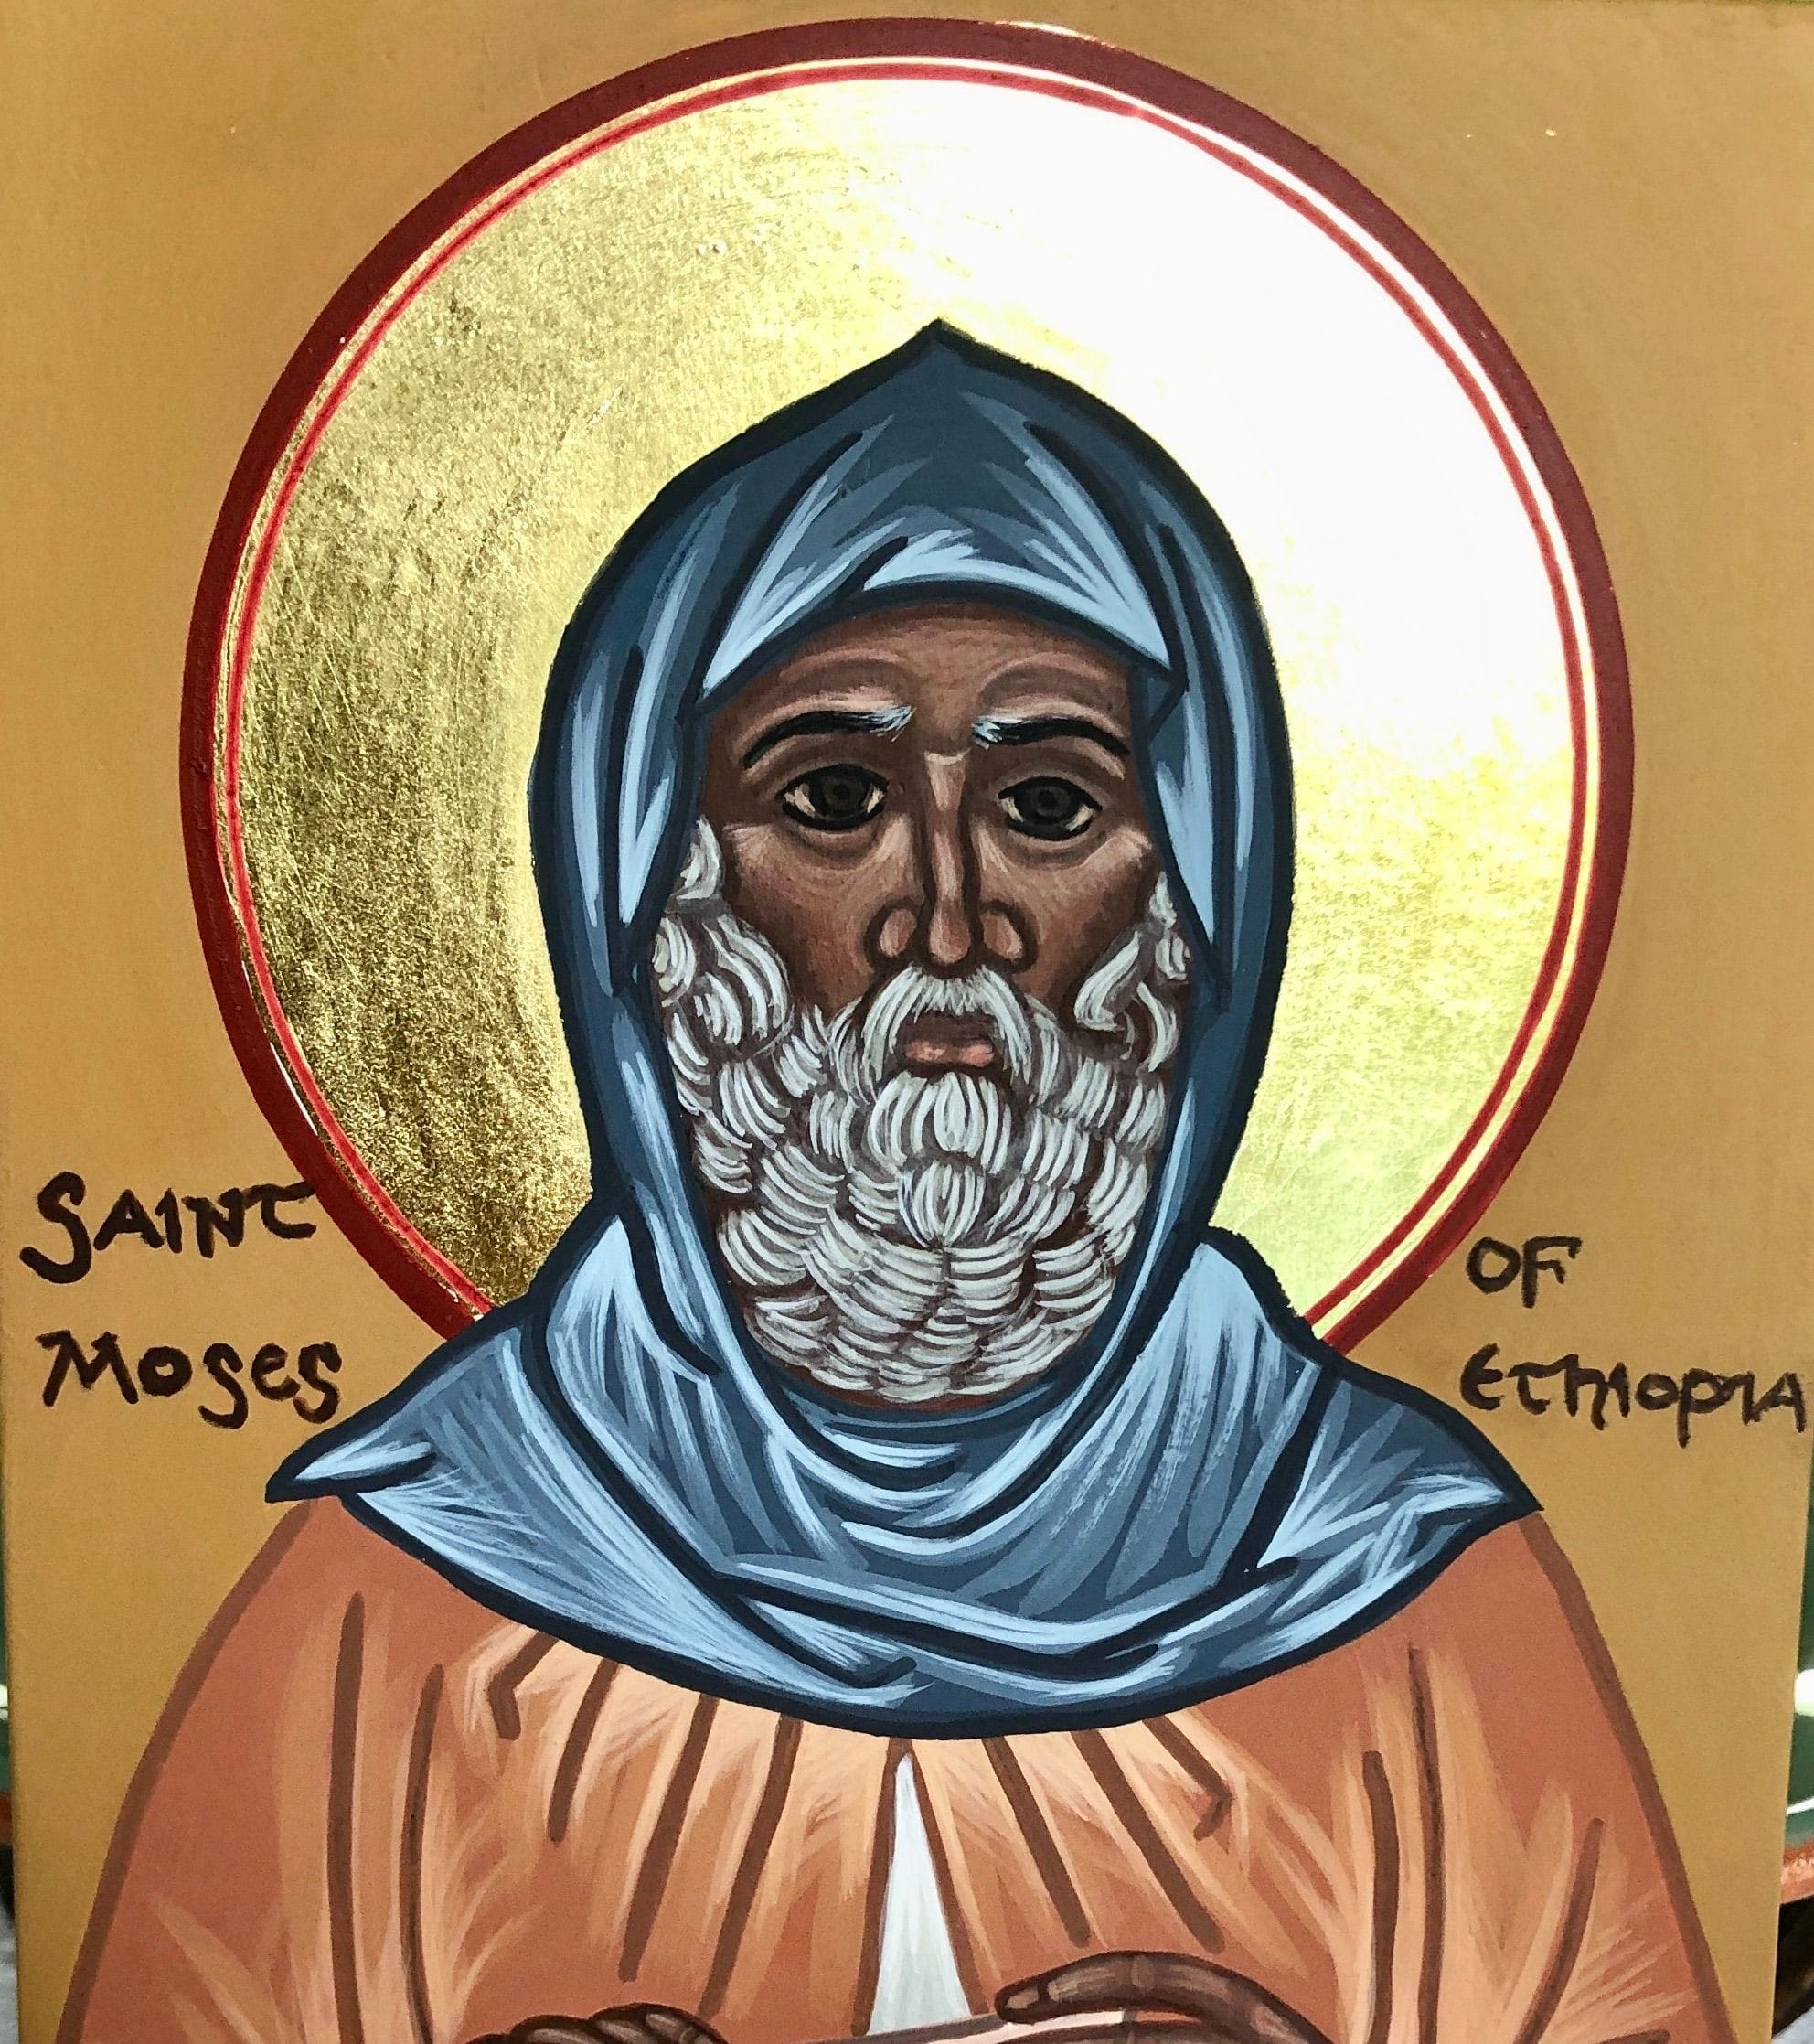 St. Moses ofEthiopia, Moses the Black, patron of Africa and non-violence.Feast day August 28.